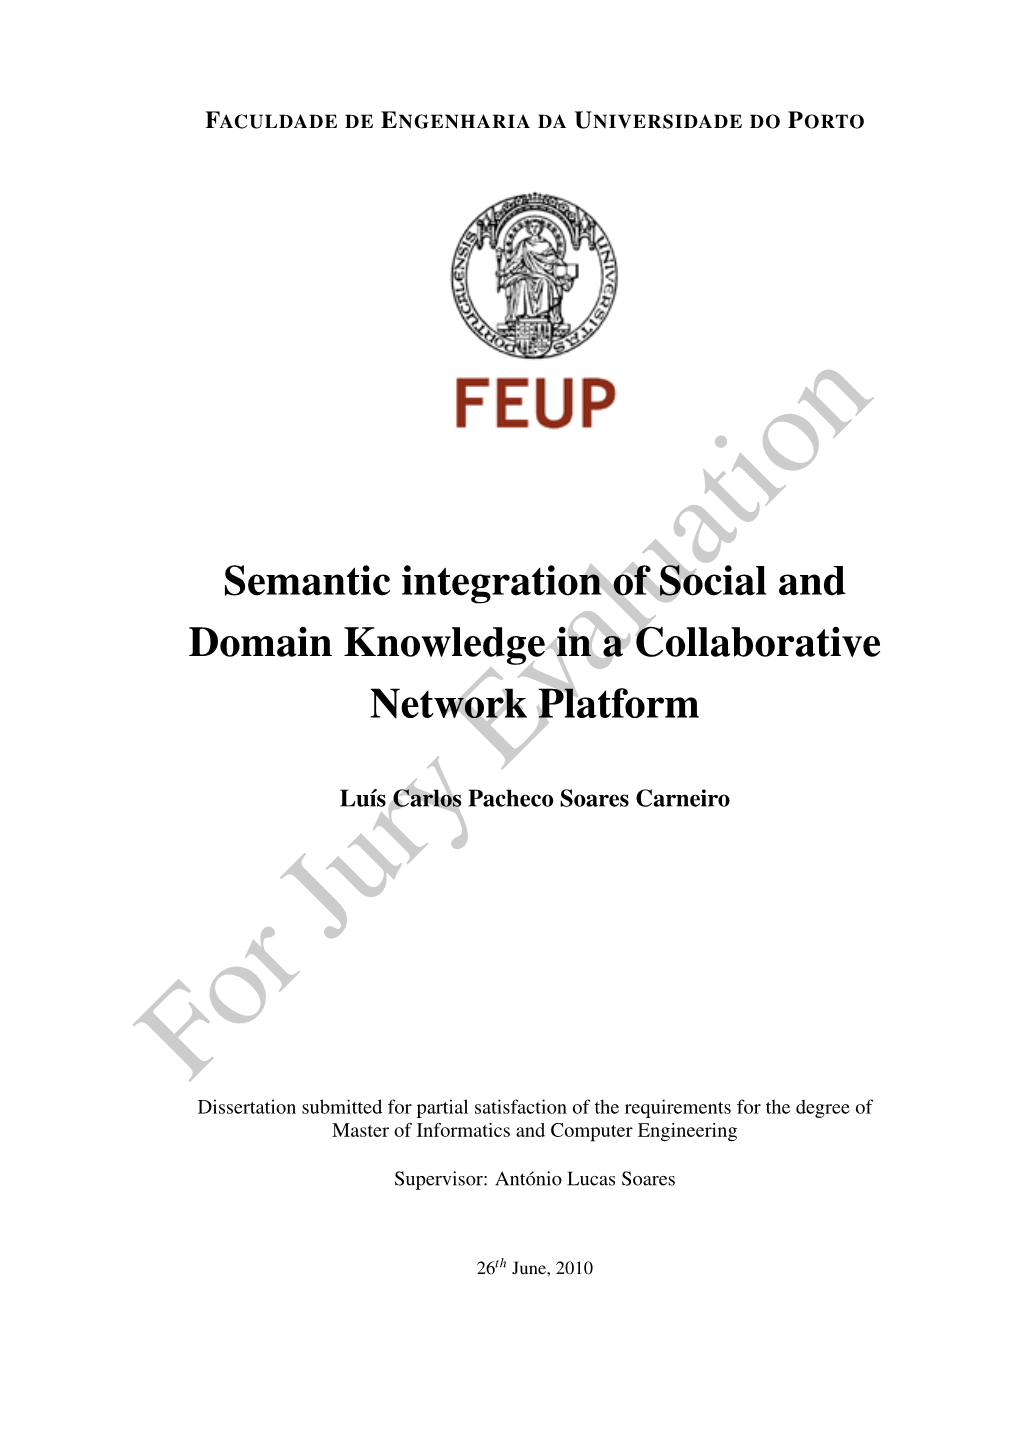 Semantic Integration of Social and Domain Knowledge in a Collaborative Network Platform